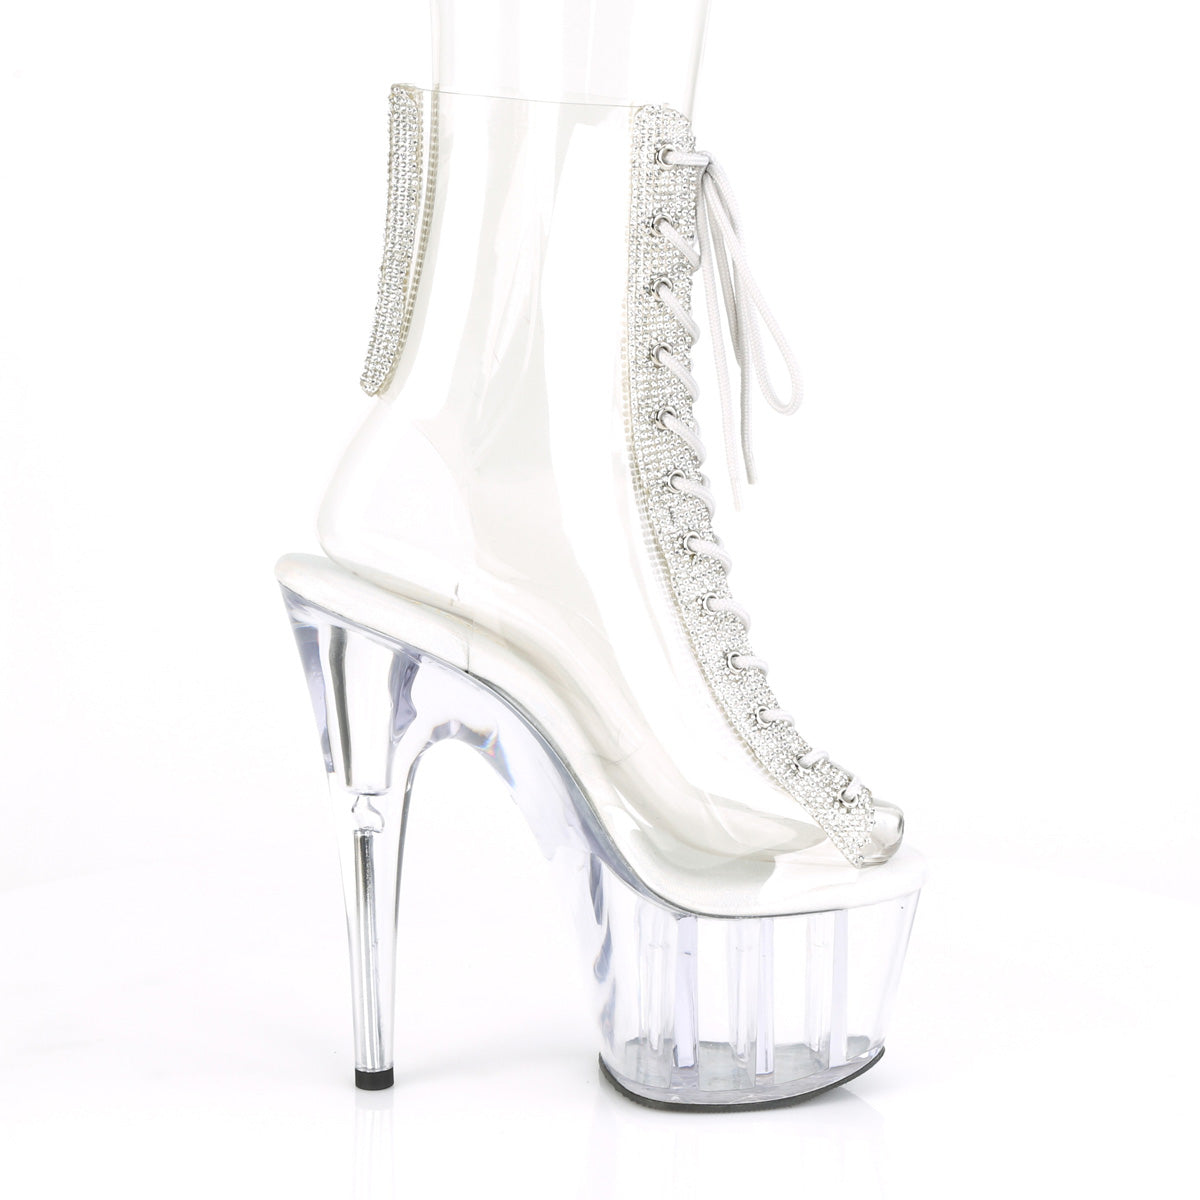 ADORE-1016C-2 Pleaser Pole Dancing Shoes Ankle Boots Pleasers - Sexy Shoes Fetish Heels